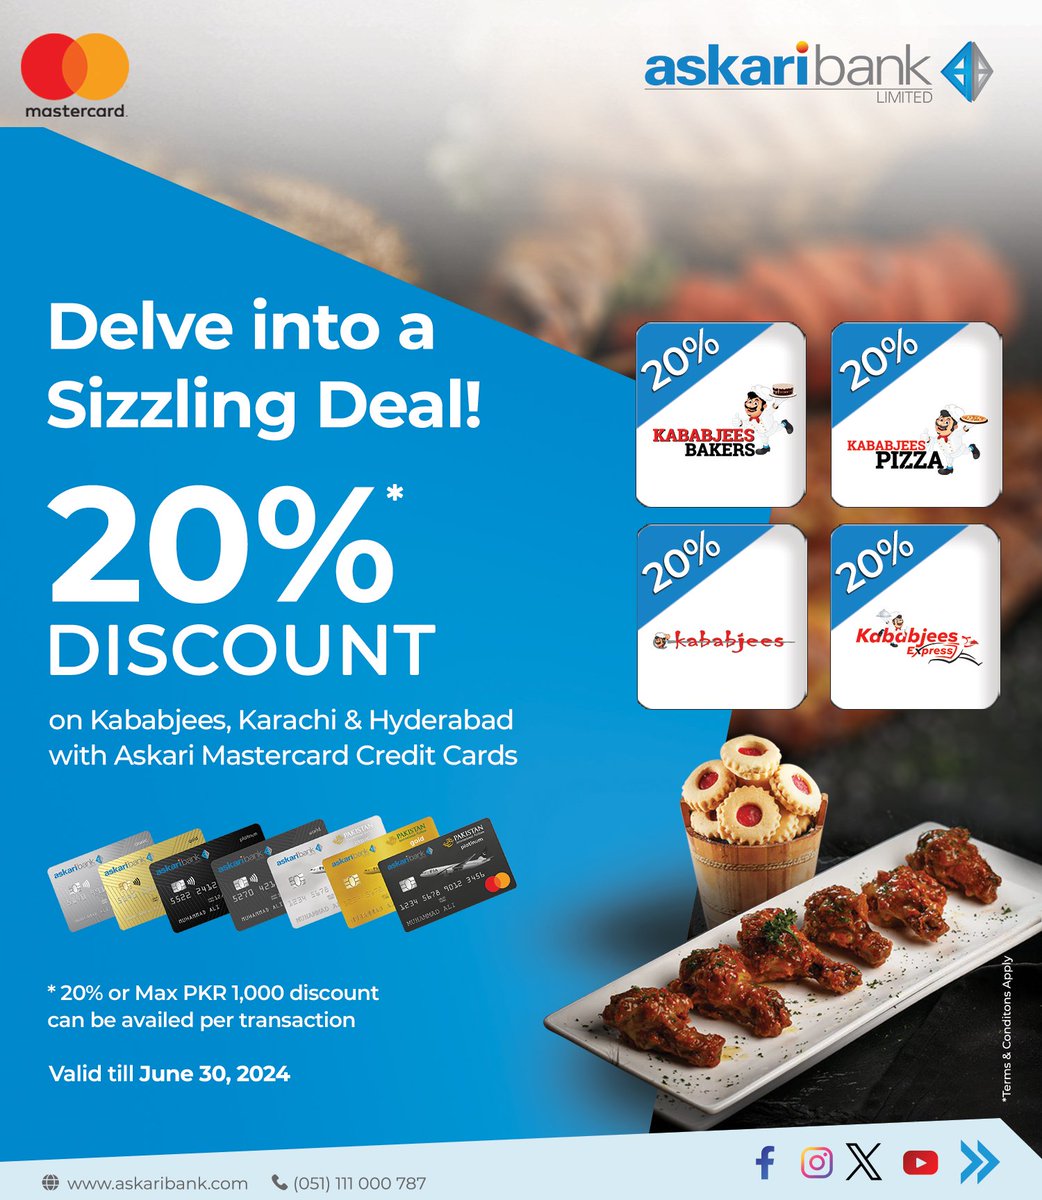 Spice up your life with a sizzling deal! Enjoy 20% Discount at Kababjees, Karachi & Hyderabad with your Askari Mastercard Credit Cards. Offer valid until June 30, 2024. Link: rb.gy/khhnik #askaribank #foodiefun #kababjees #mastercard #discountdeal